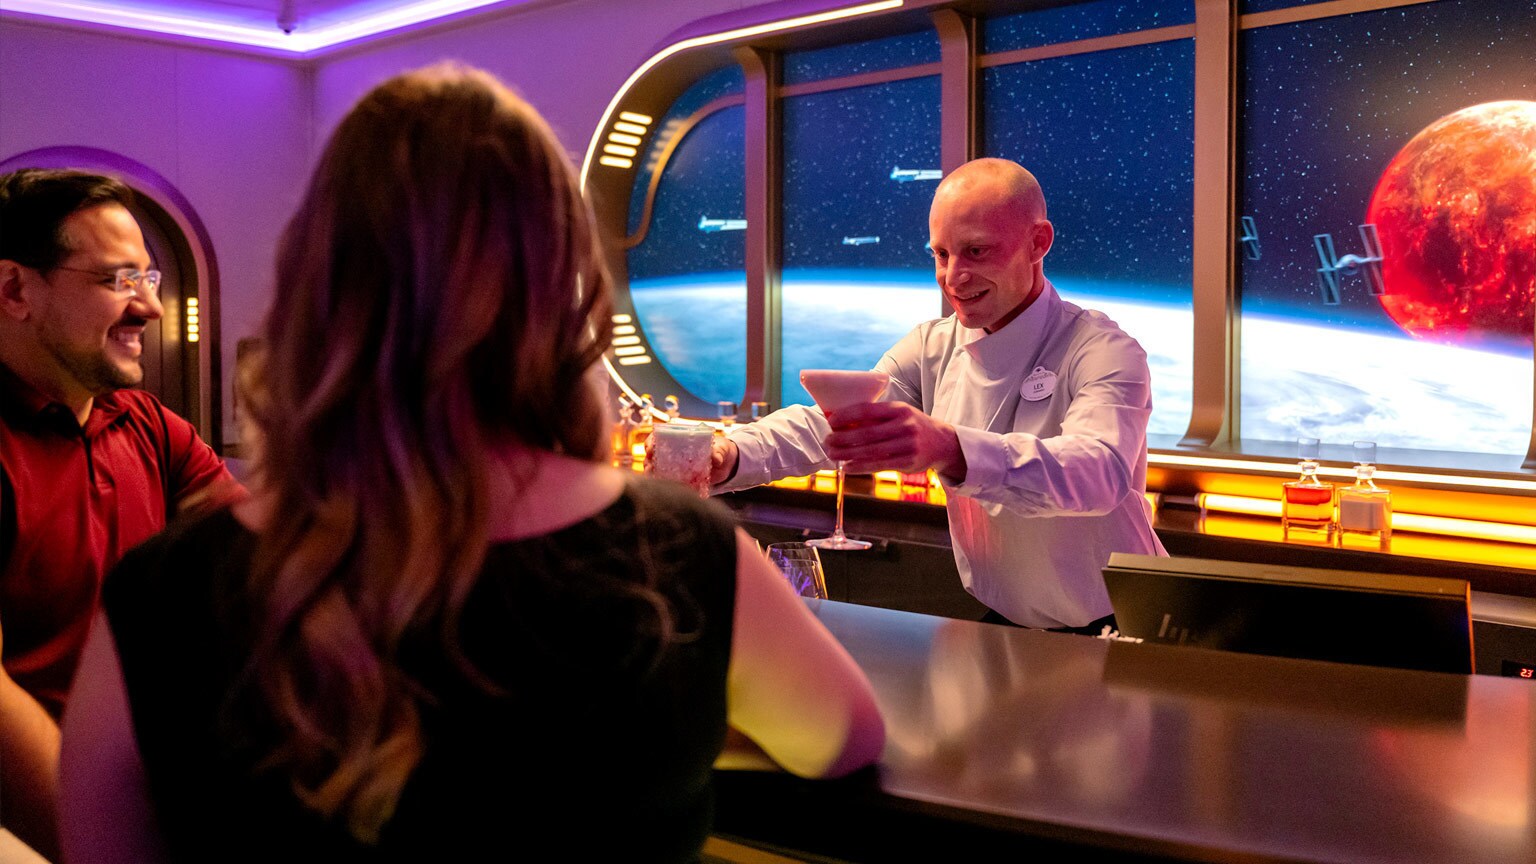 We Checked Out the Drinks, Easter Eggs, and Galactic View at Star Wars: Hyperspace Lounge